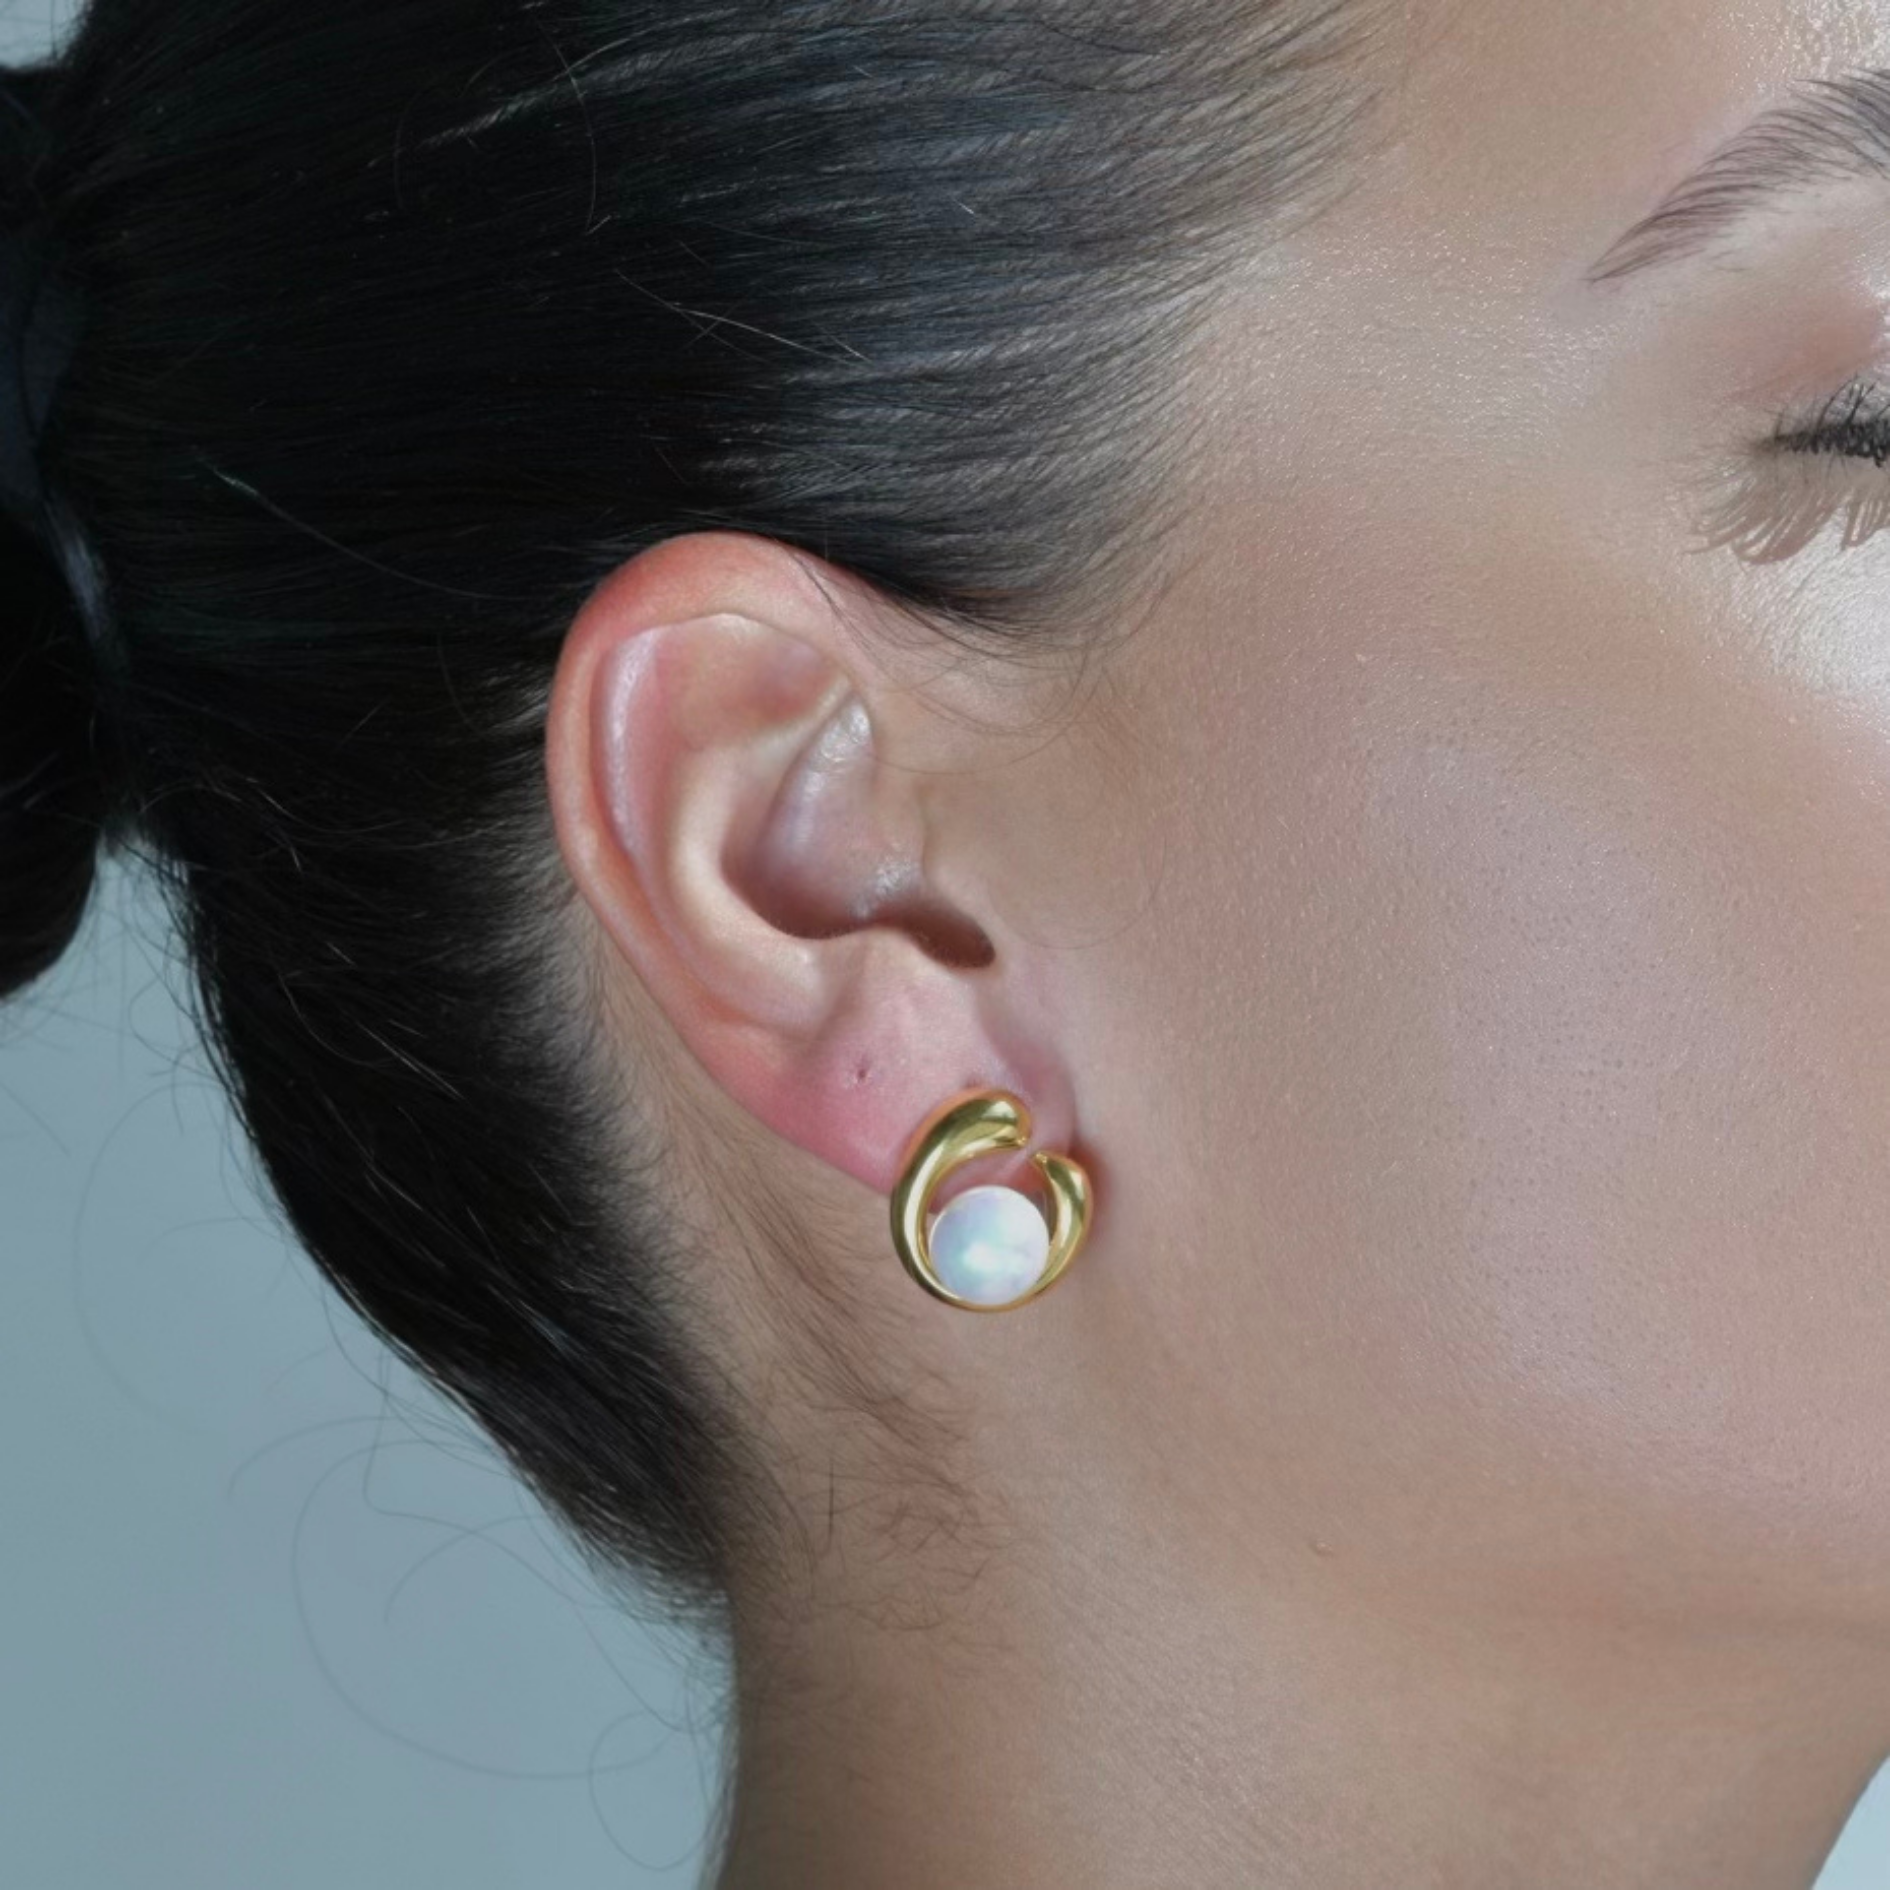 GOLD stud Earrings with a white pearl in the middle.